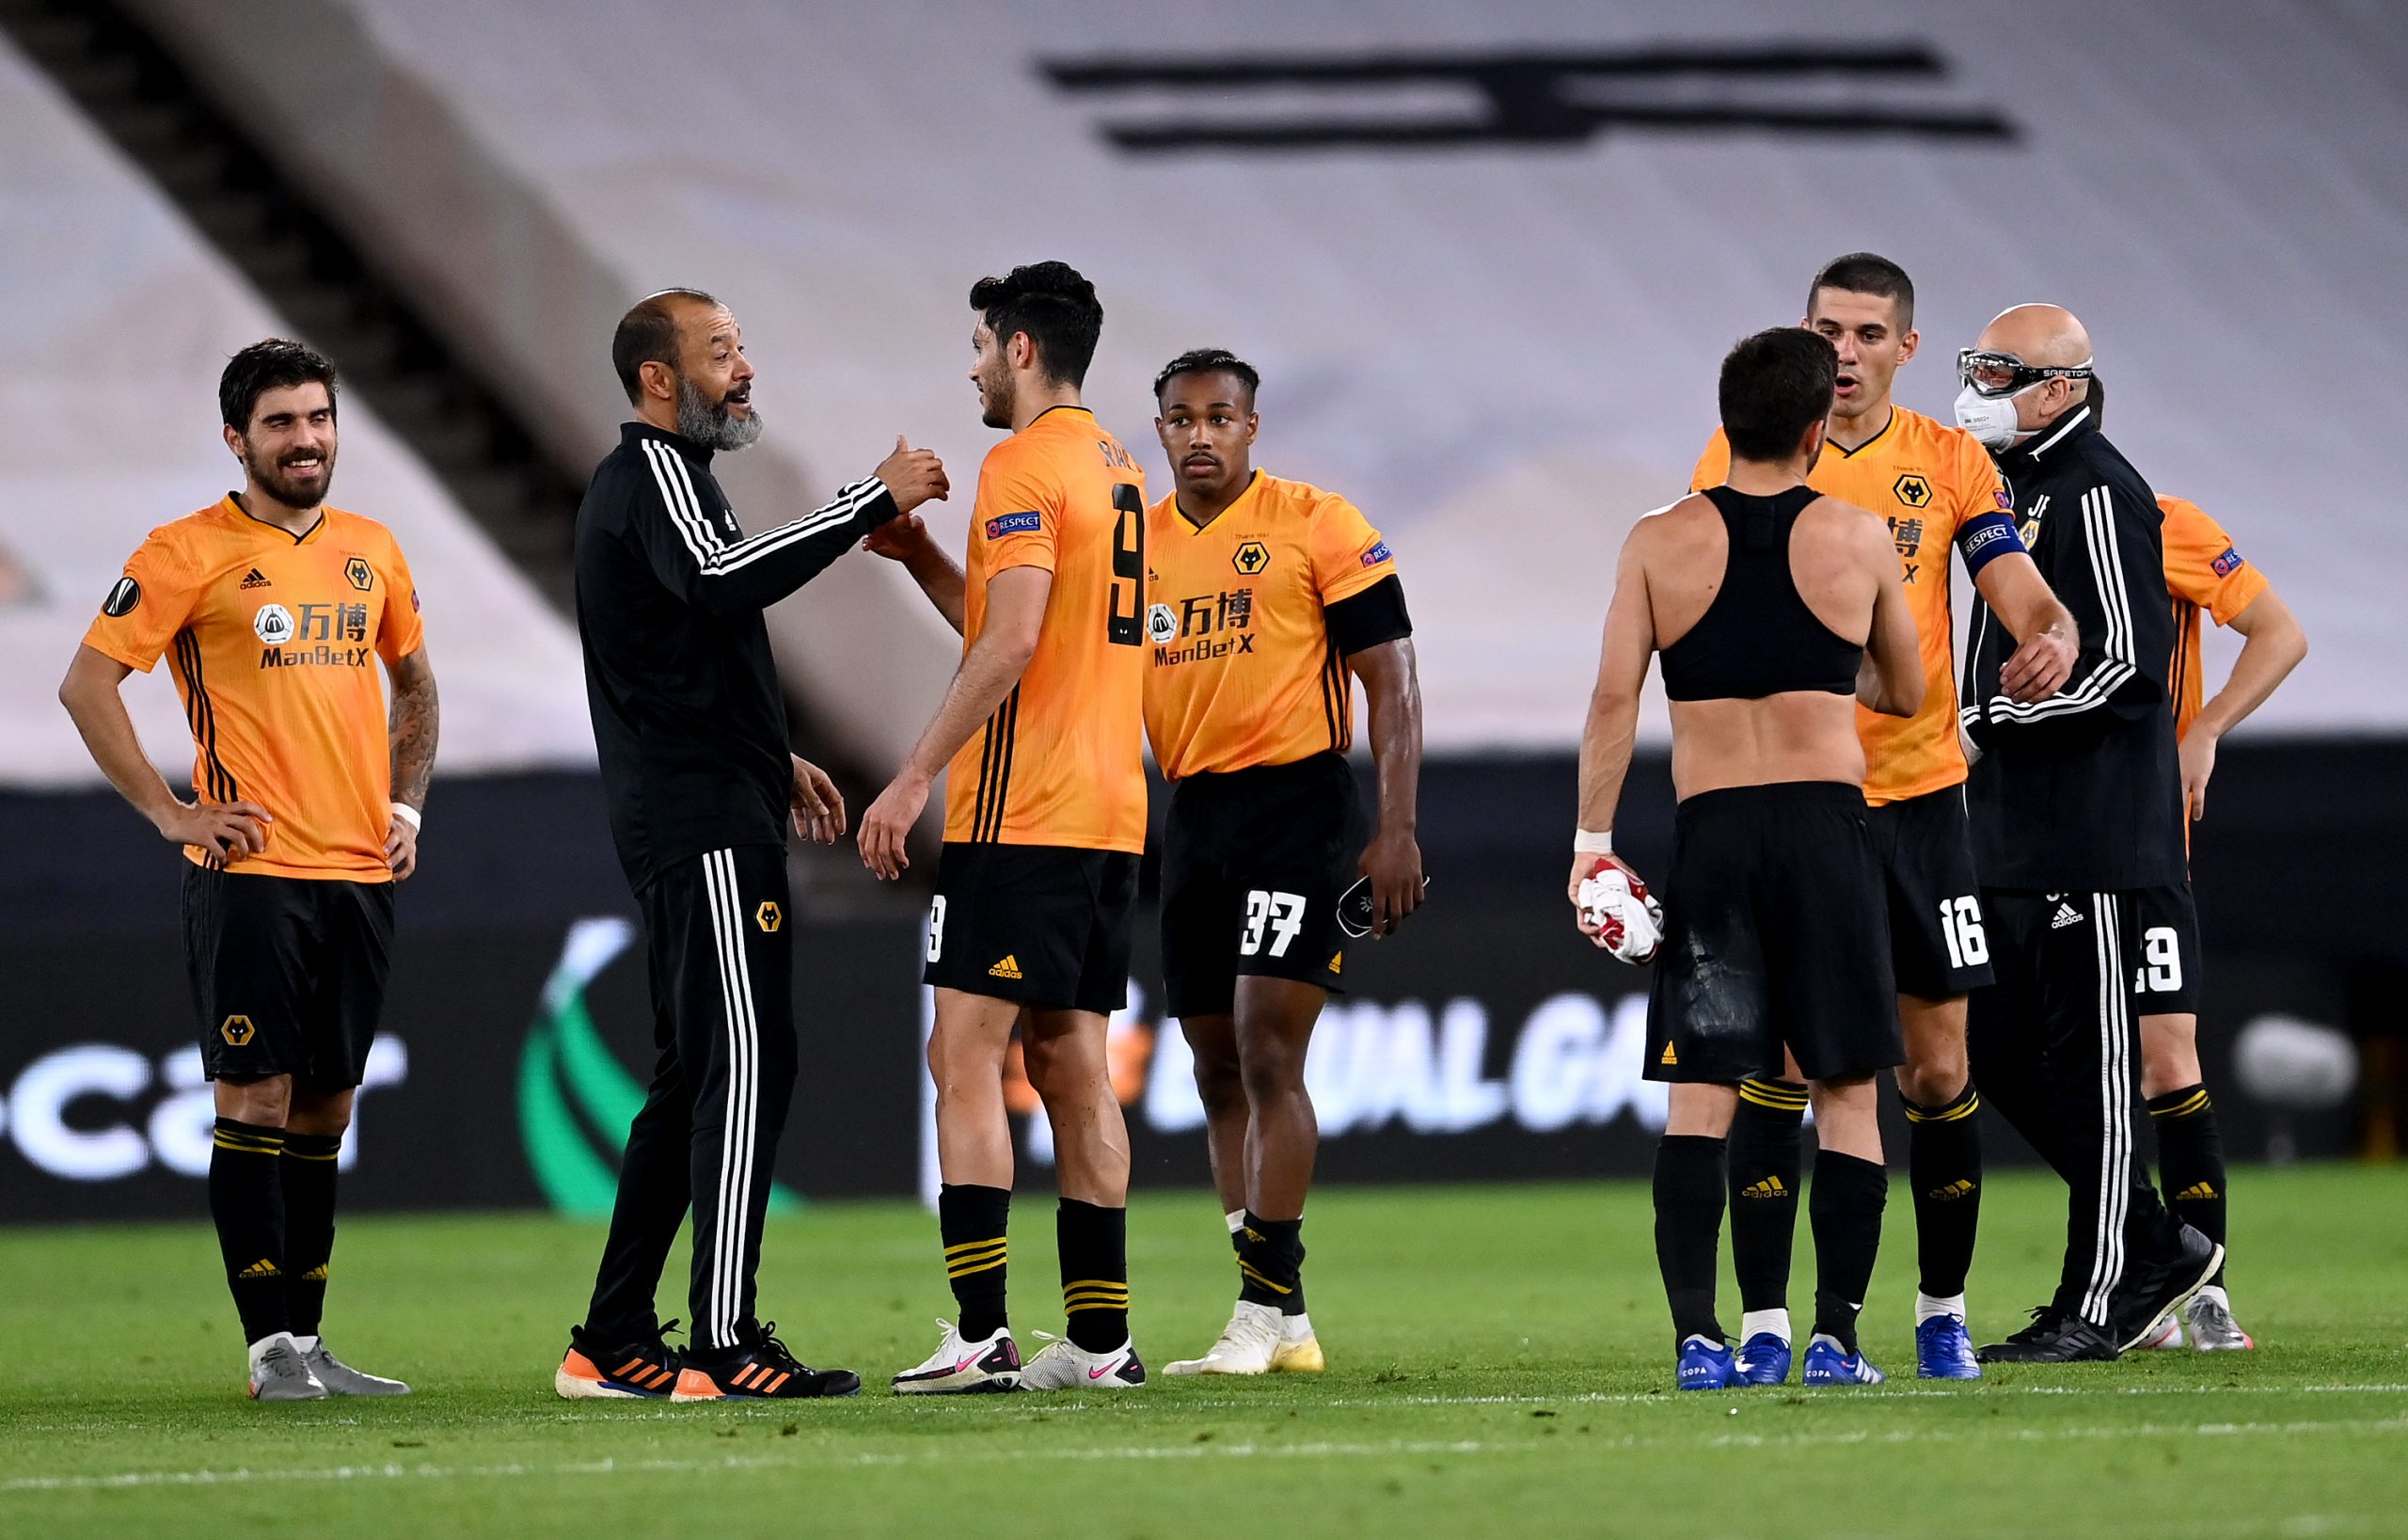 Three strikers Wolves should target in January (Wolves players and manager Nuno Espirito Santo is talking to his players in the photo)